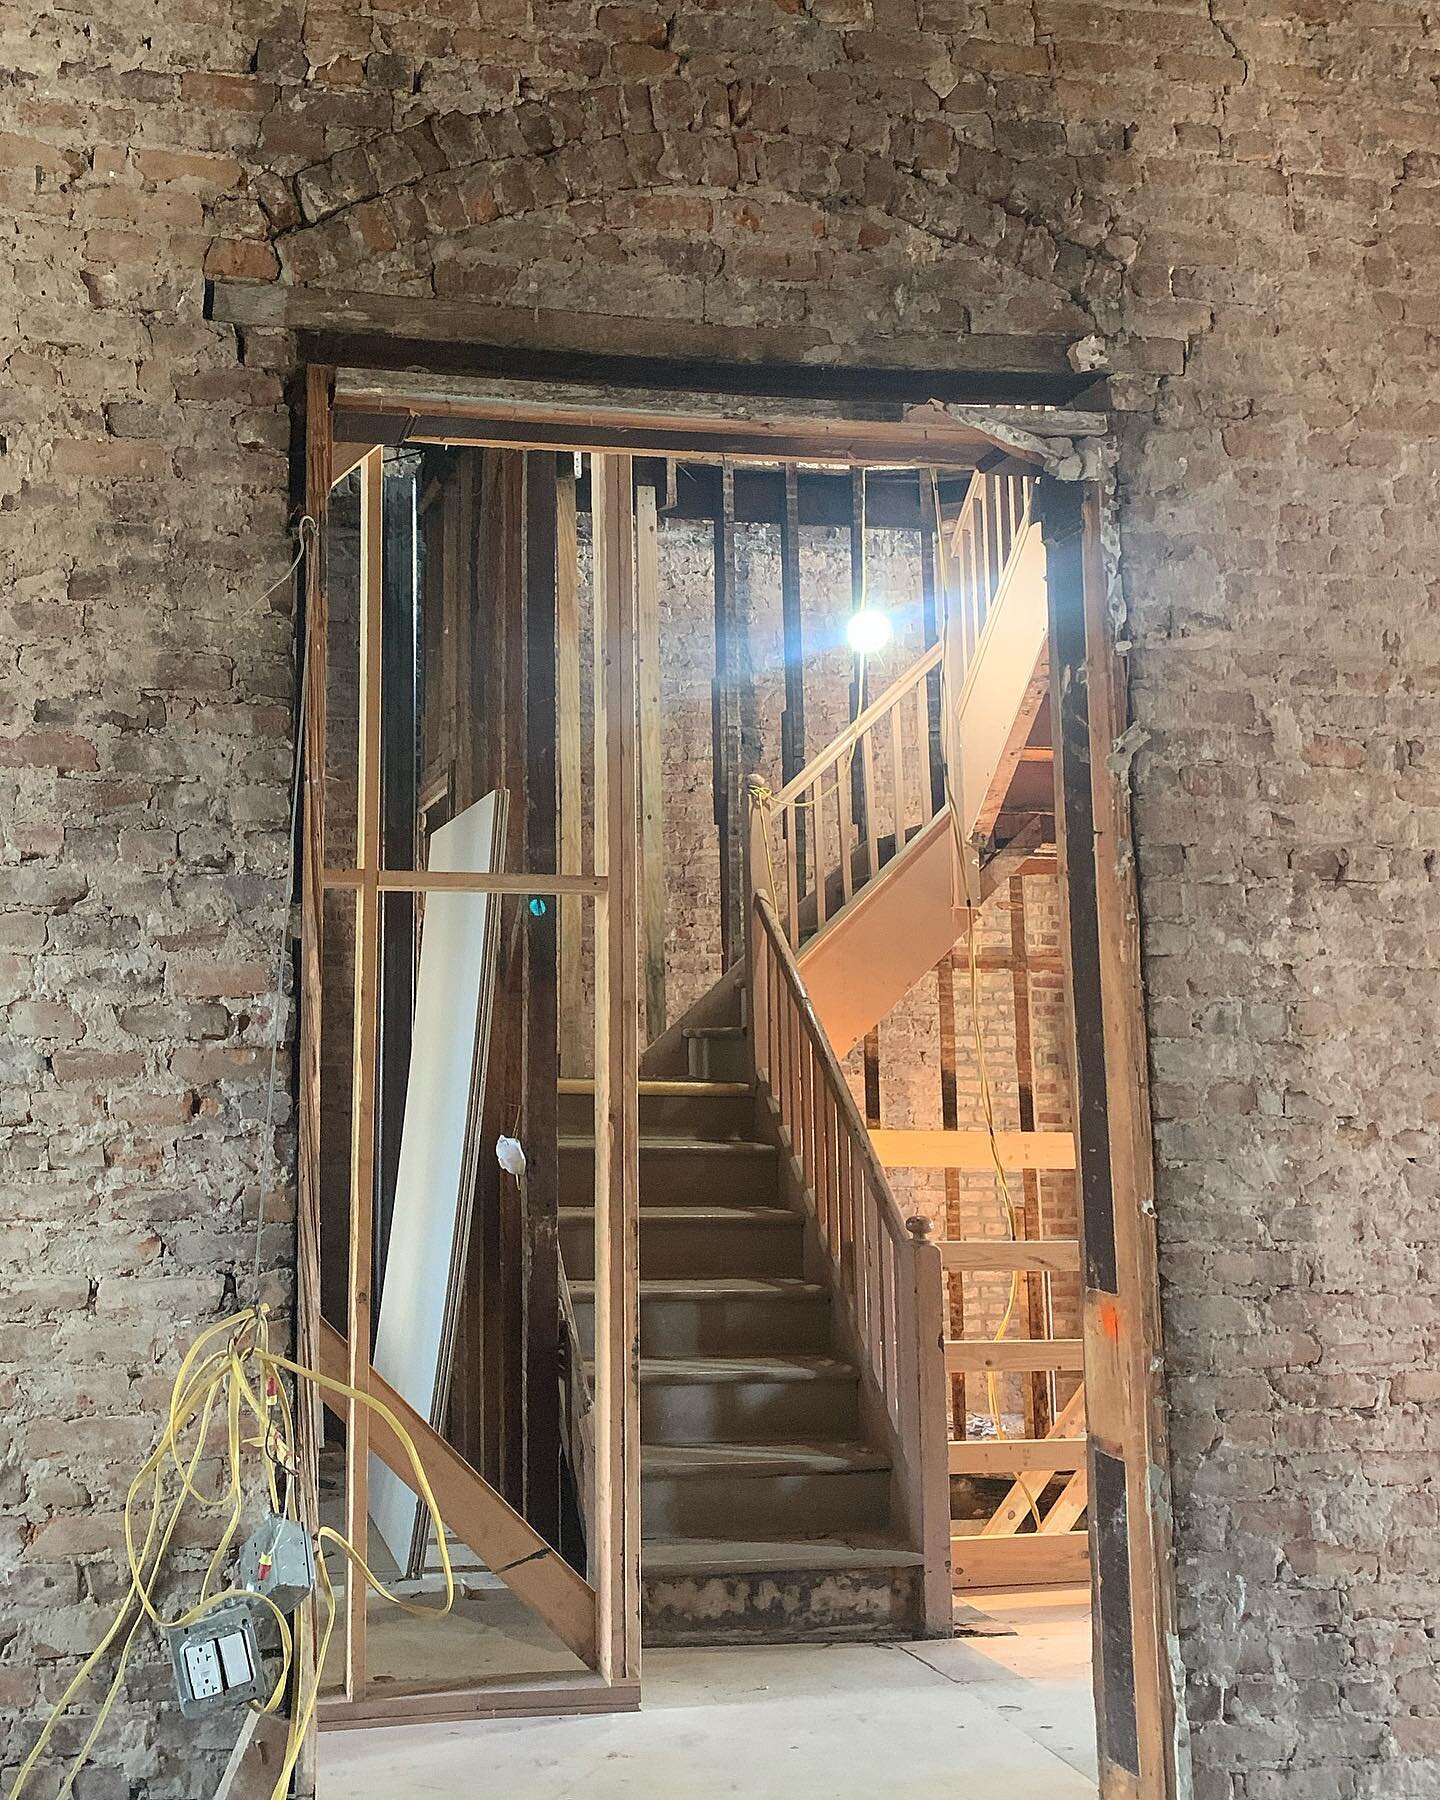 a look at the build history discovered behind the walls at one of our BK townhouse renovations
___
 #brickwork #masonry #townhouserenovation